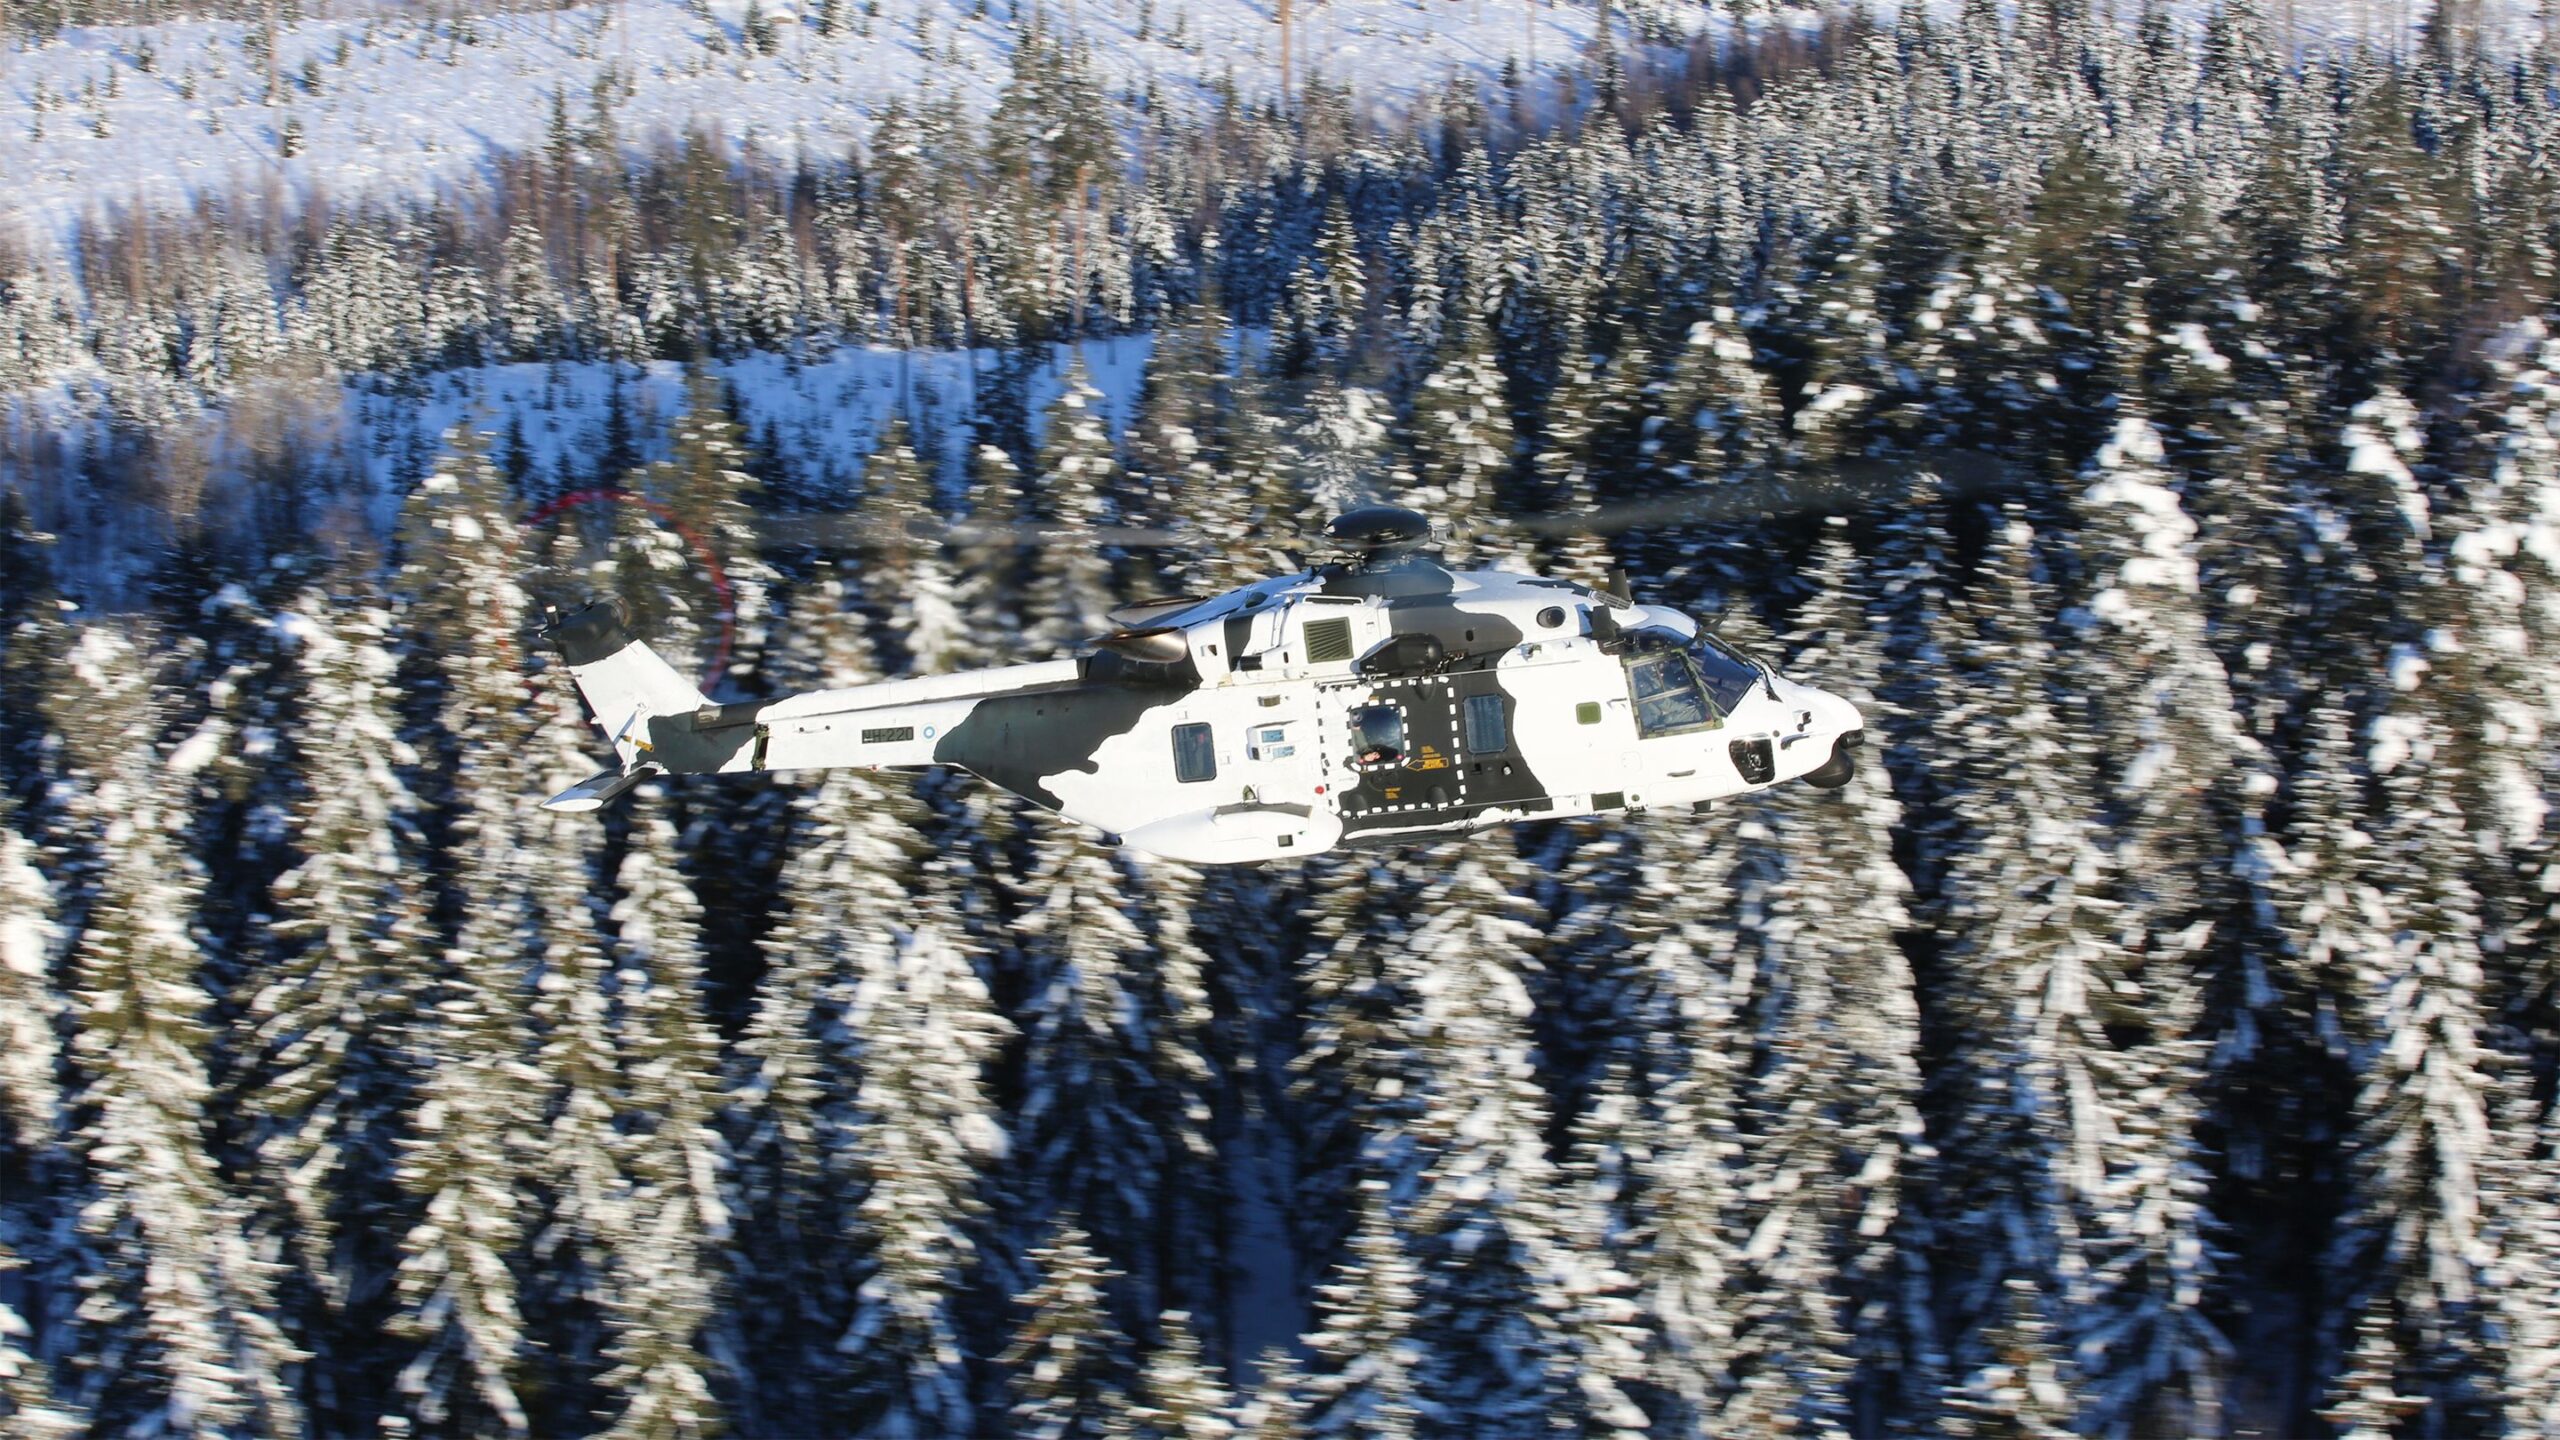 Finnish Army NH90 camouflage